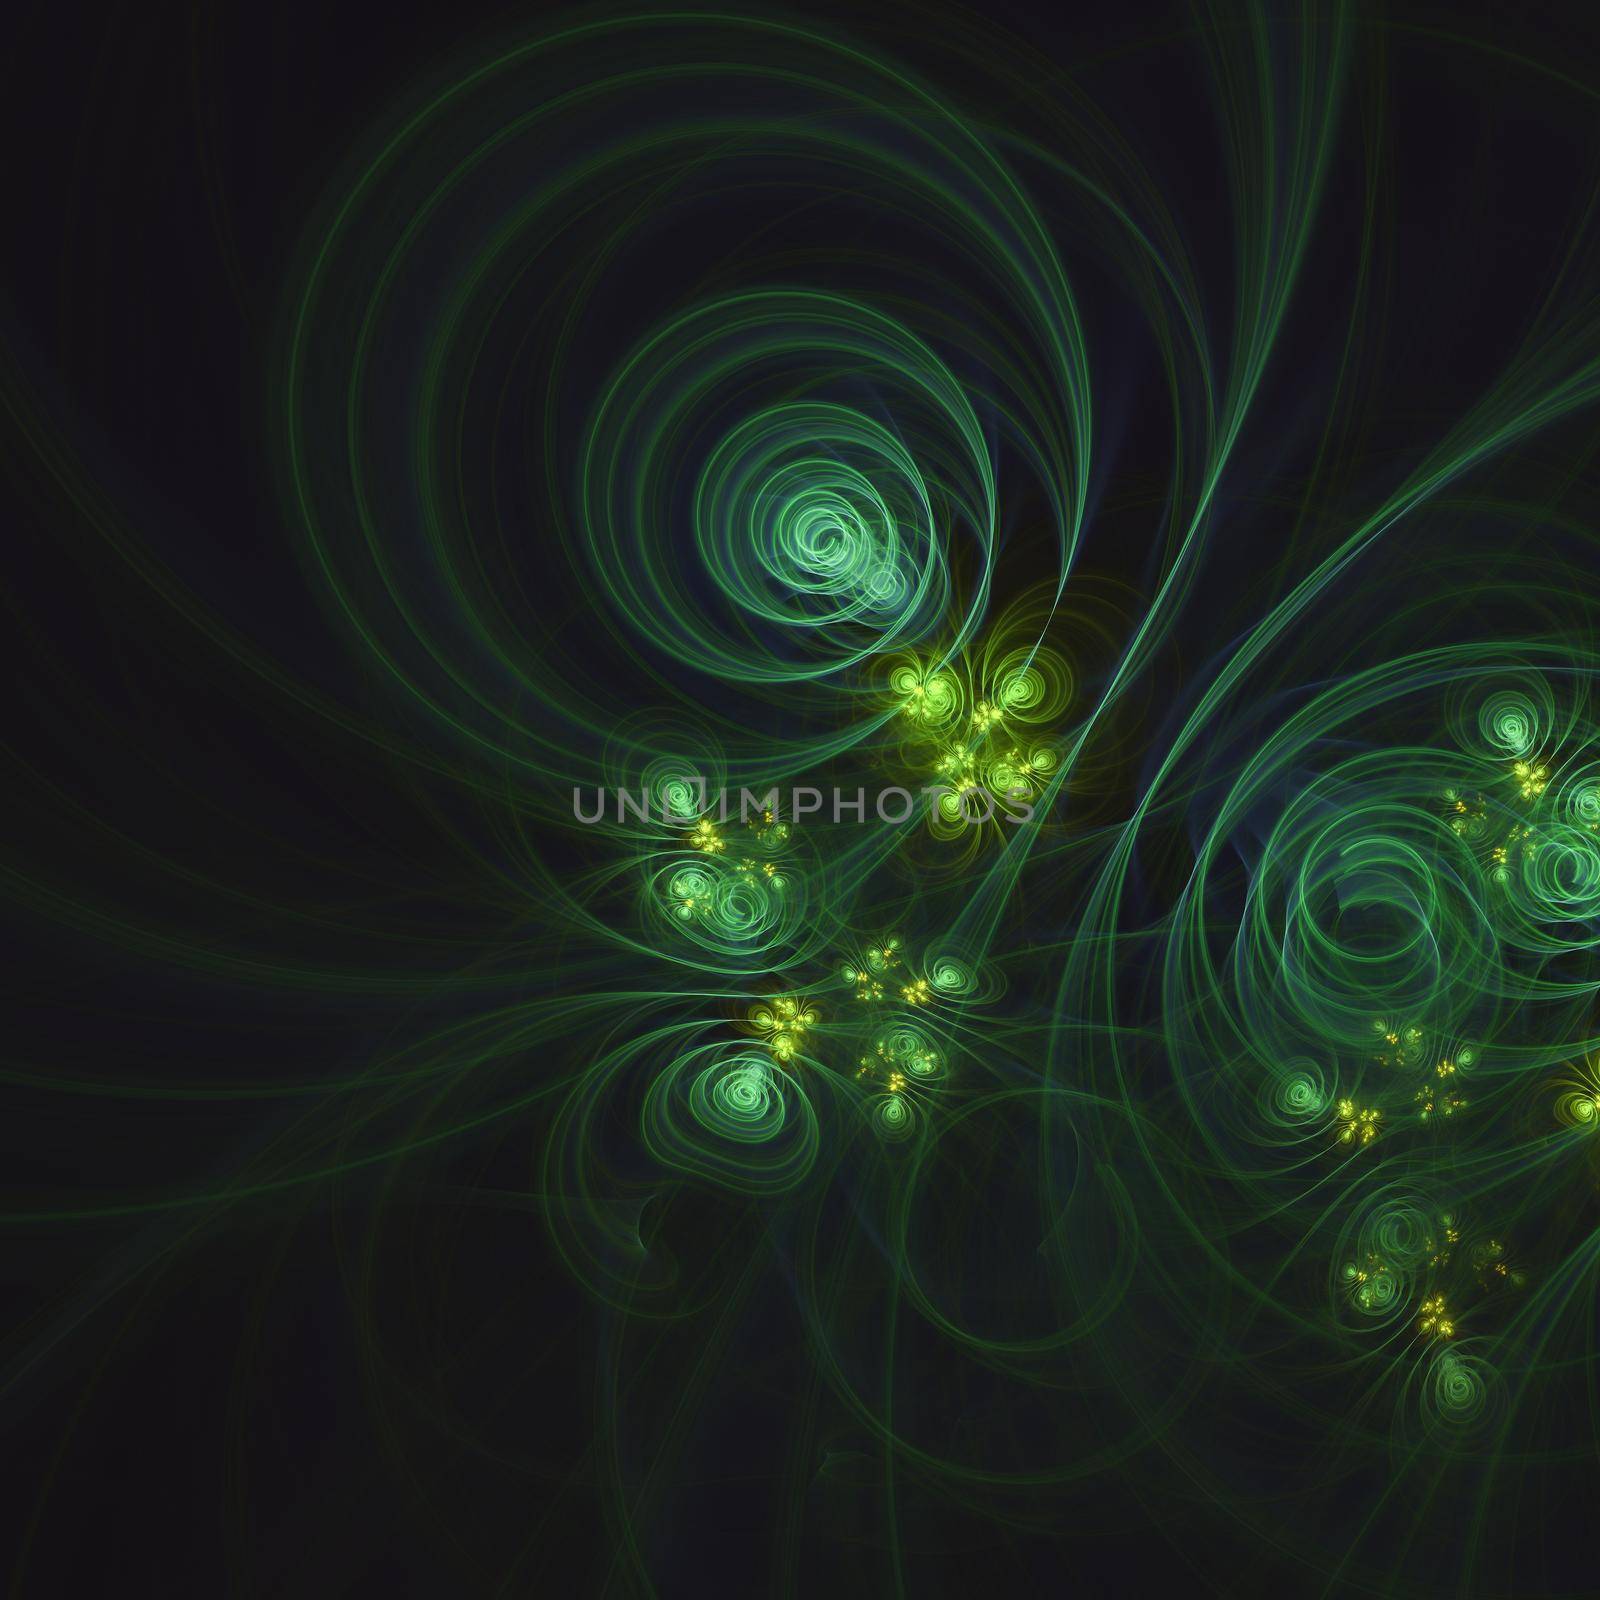 Abstract fractal fantasy background, space techno style illustration by clusterx